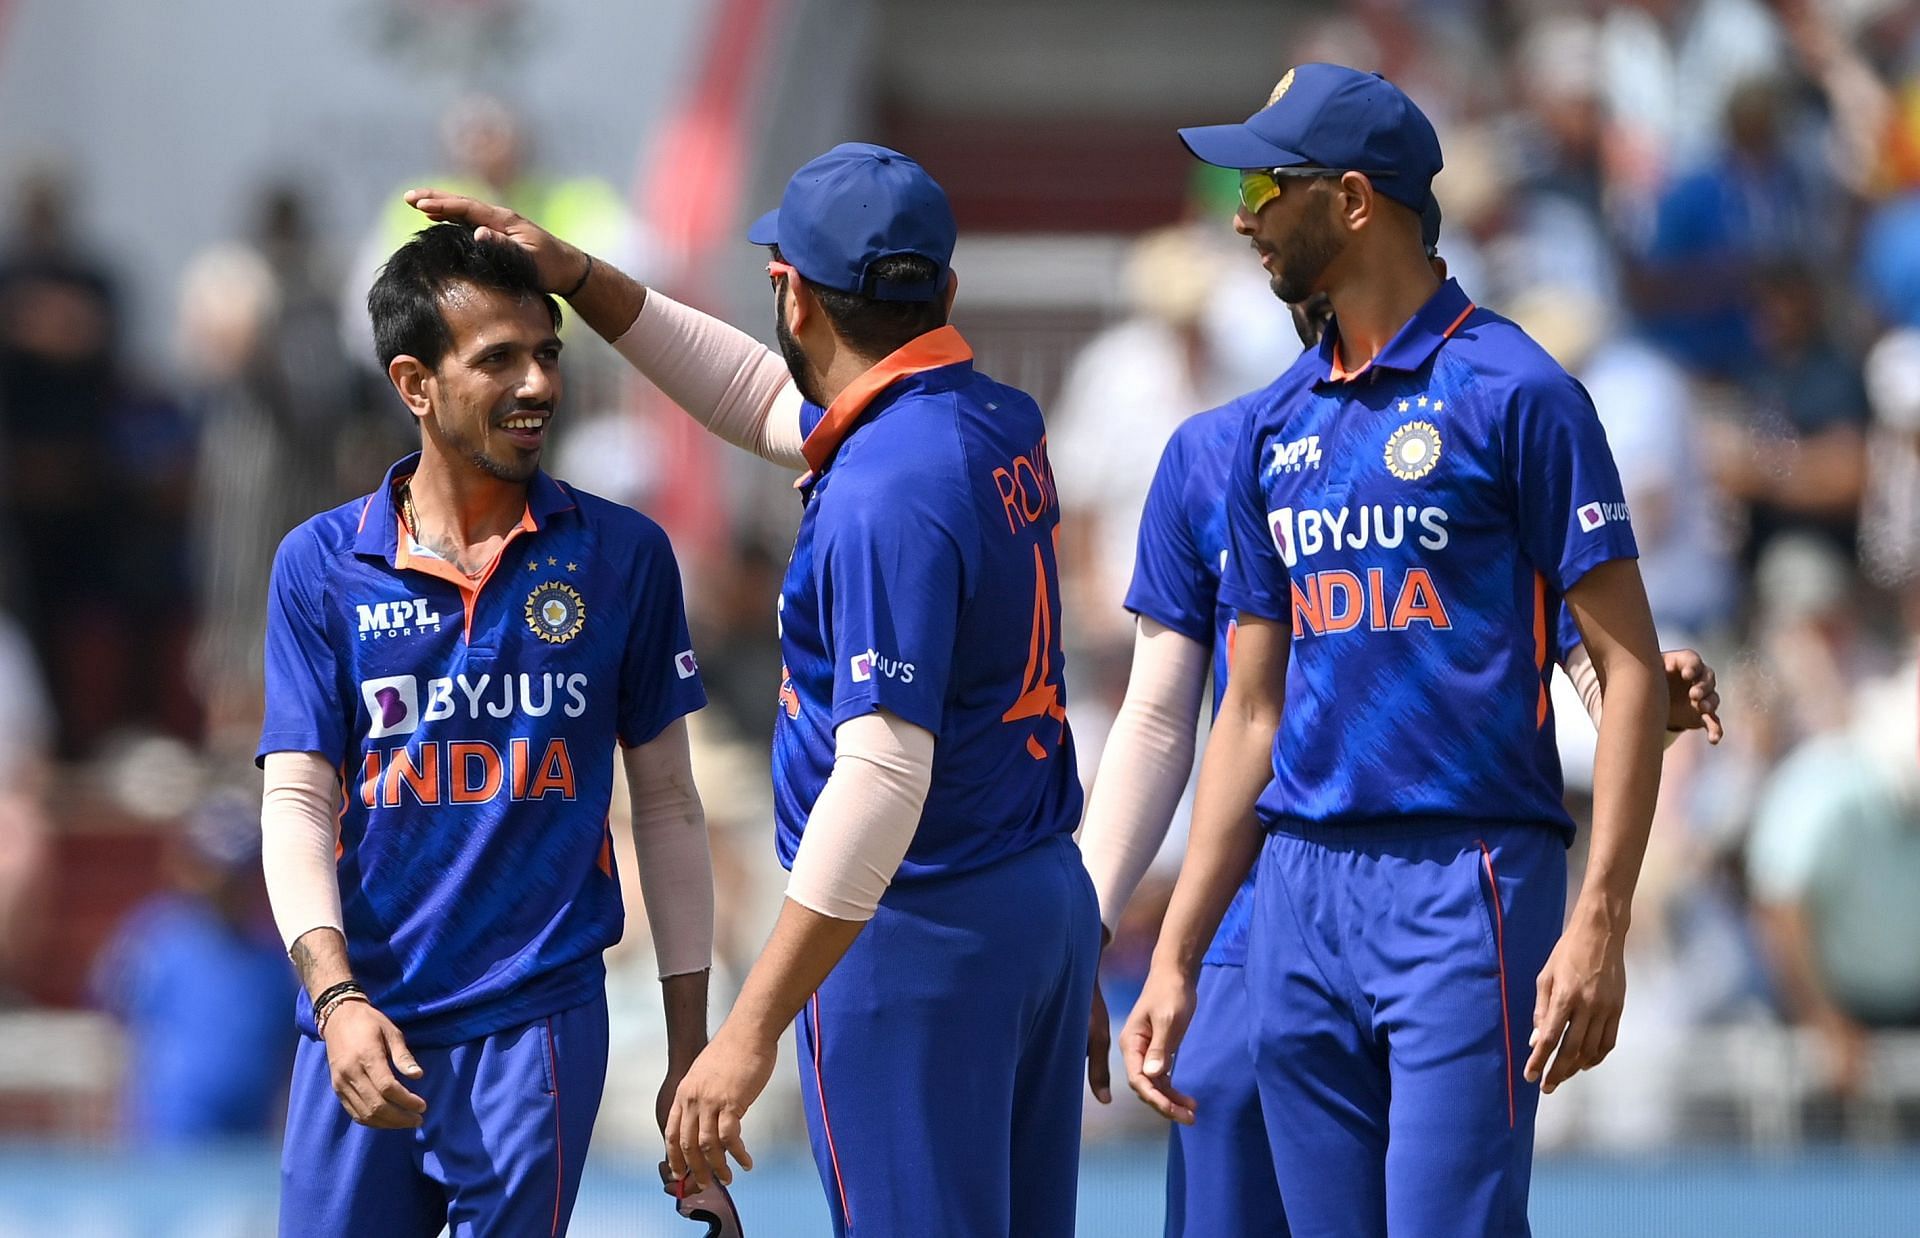 Yuzvendra Chahal (left) is yet to pick up a wicket in the ongoing Asia Cup.